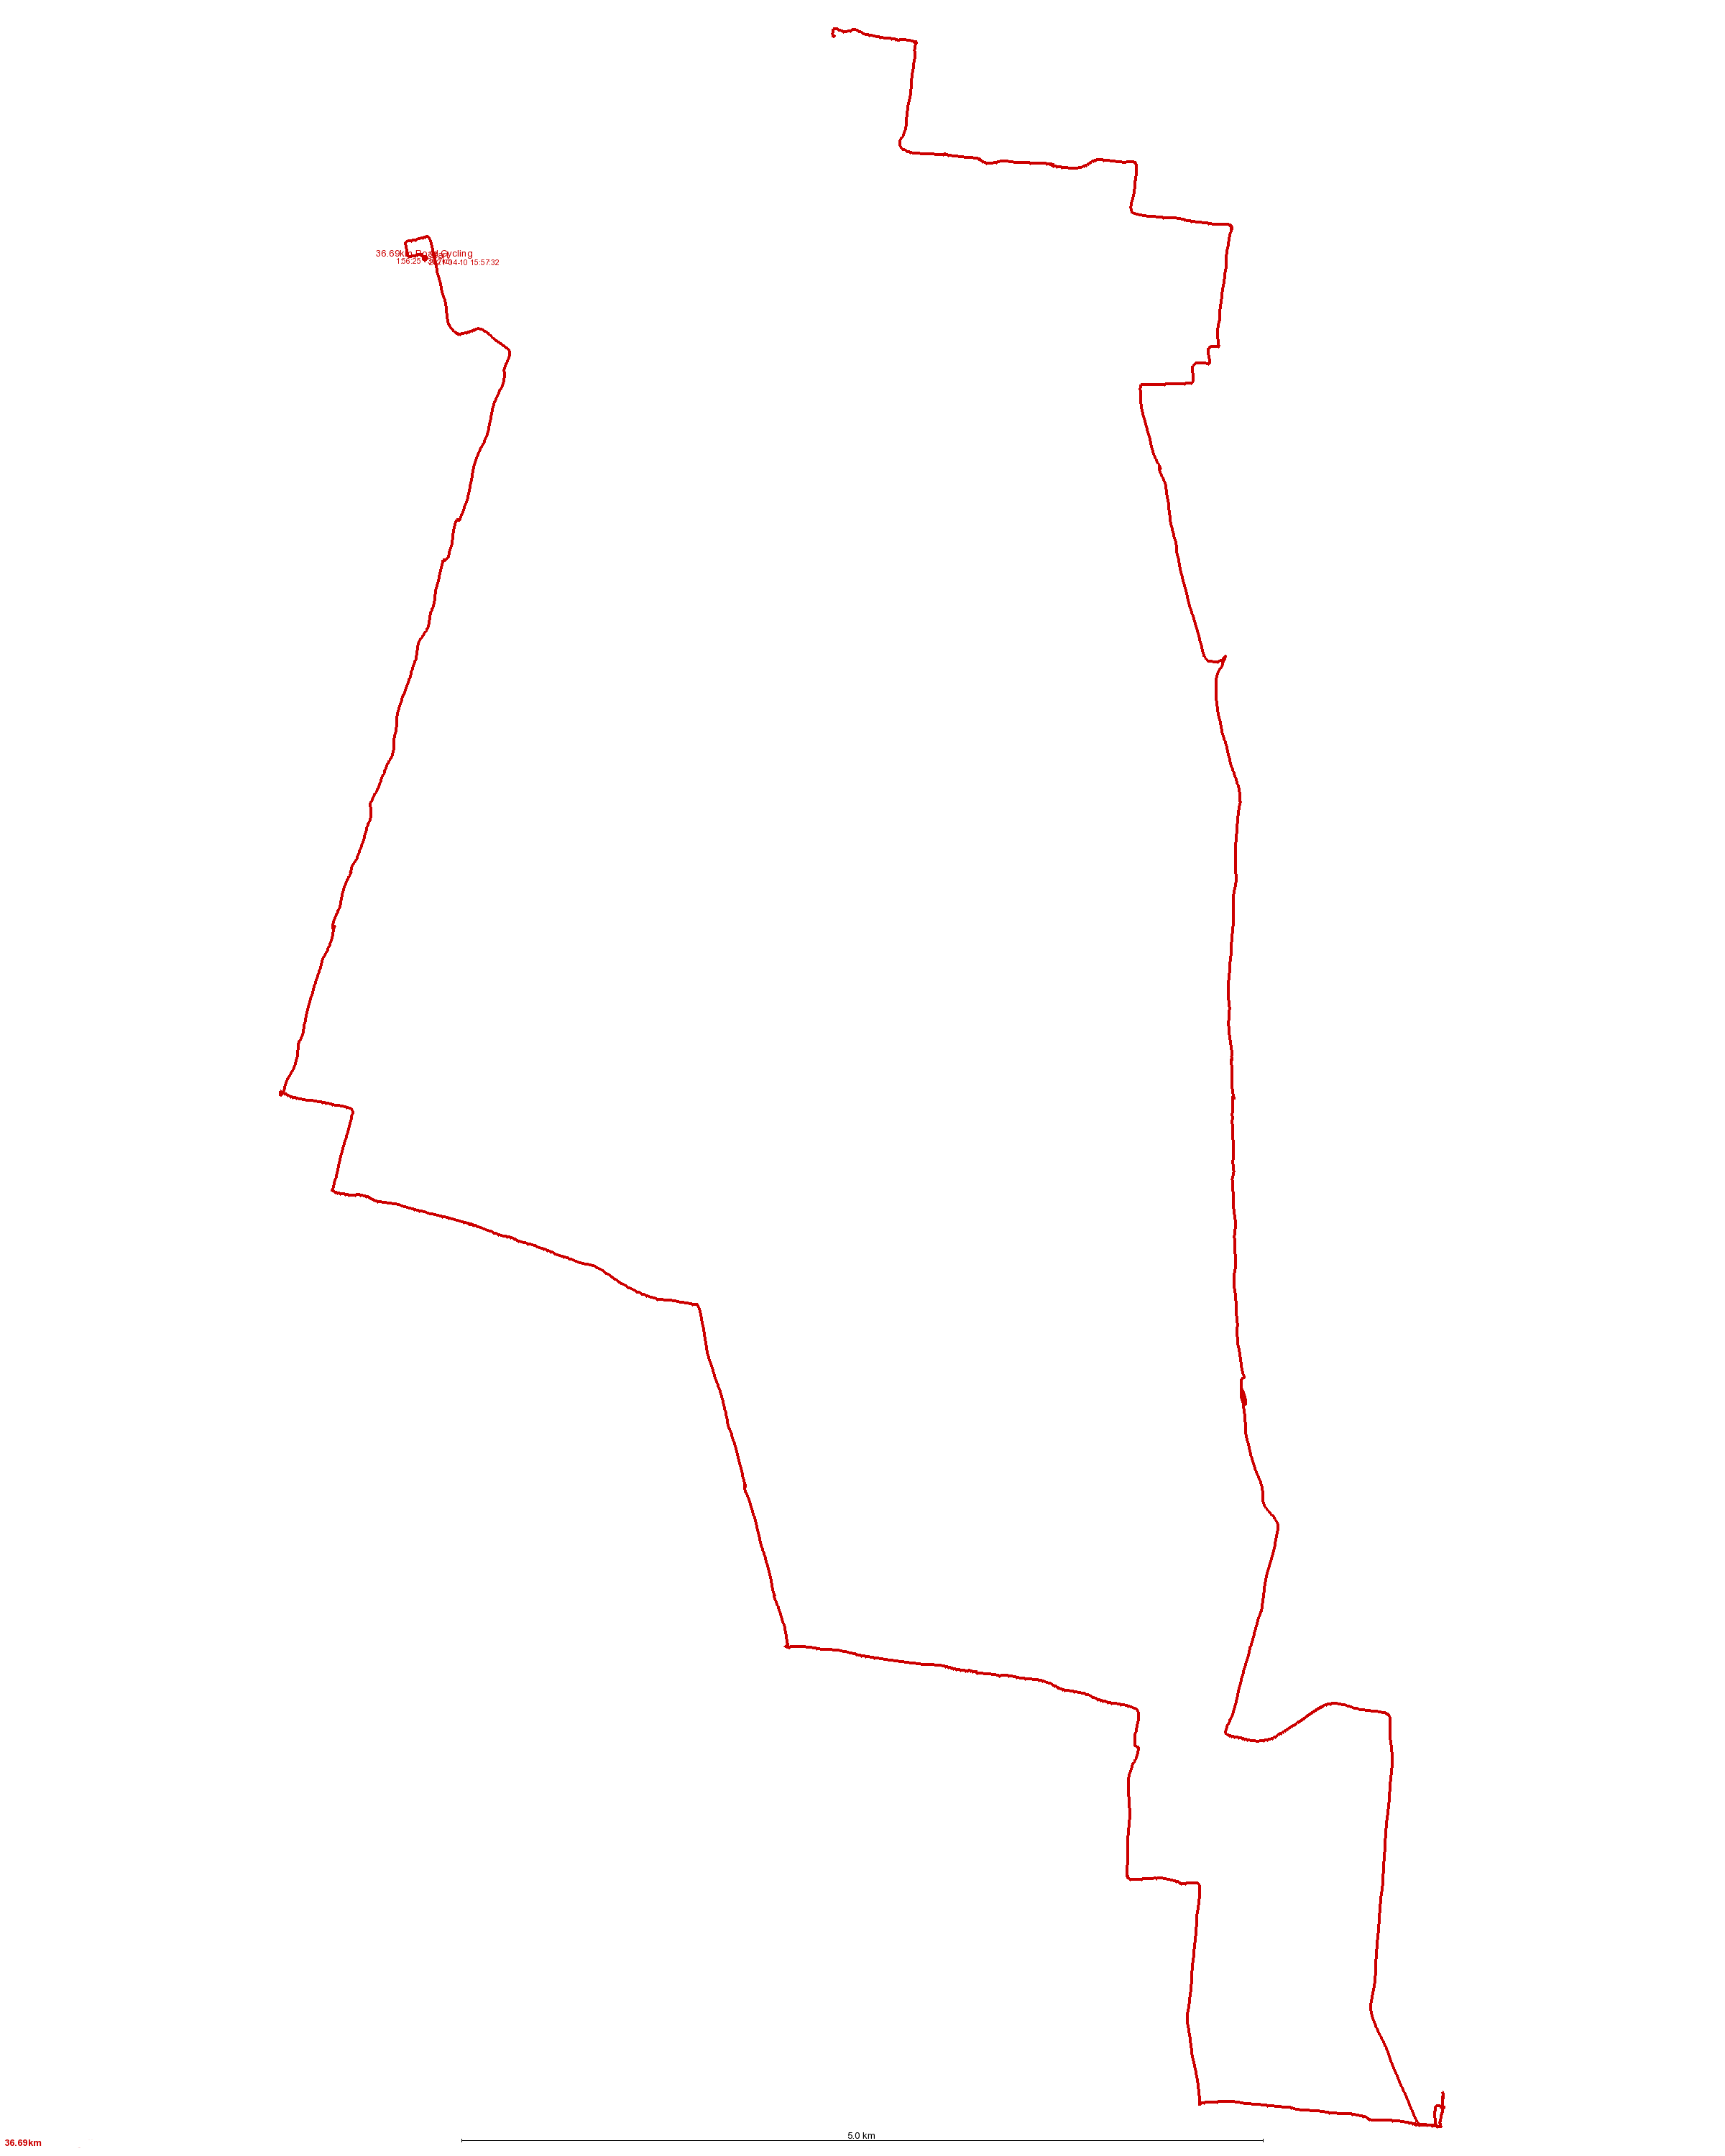 20210410122107-89074-map.png